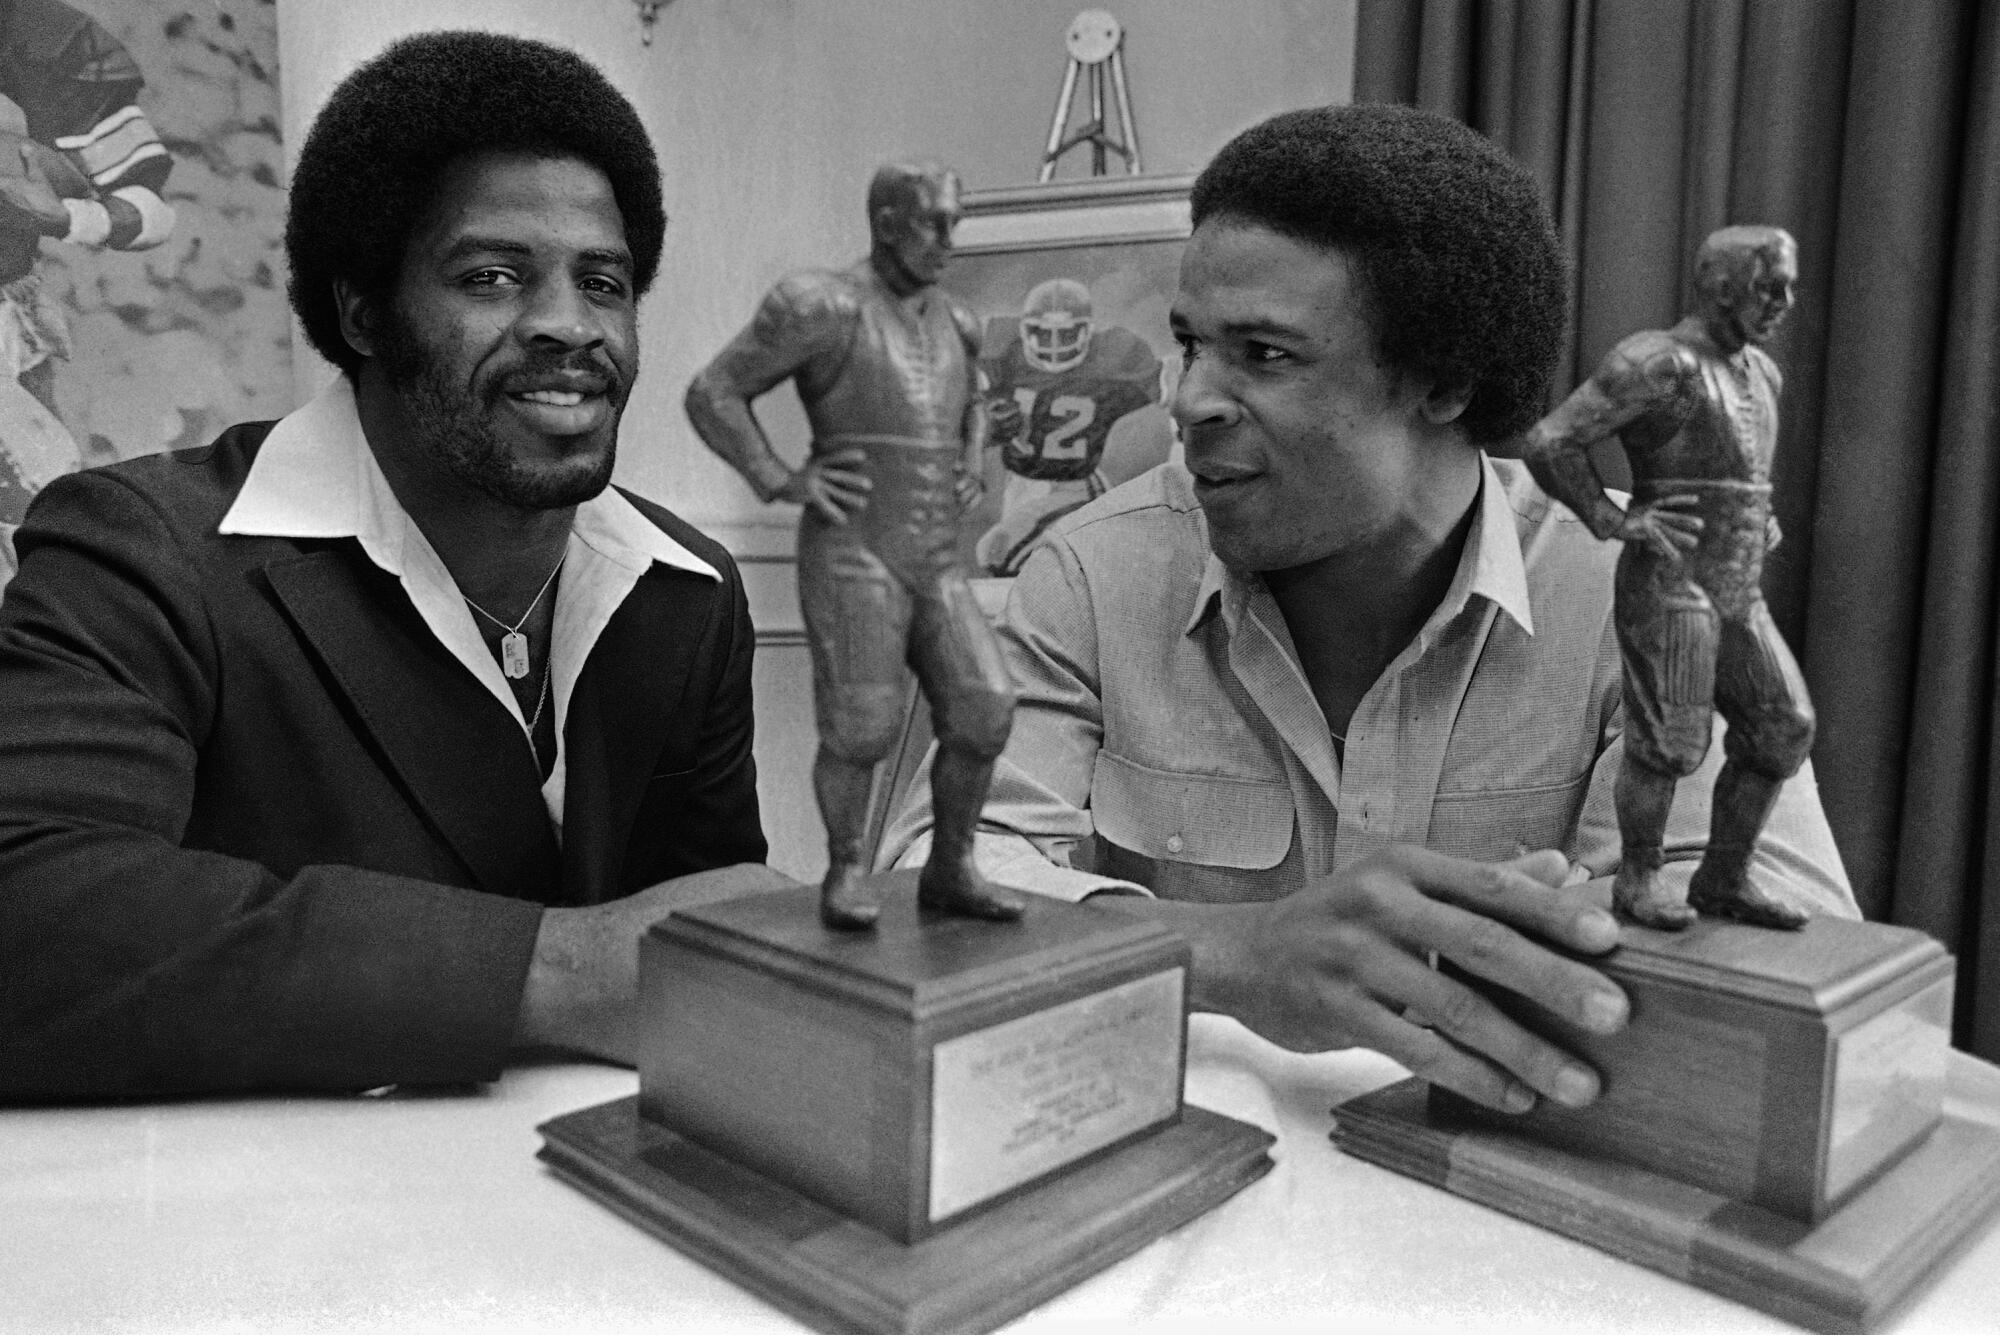 Earl Campbell of the Houston Oilers poses with USC’s Charles White on Jan. 30, 1980.